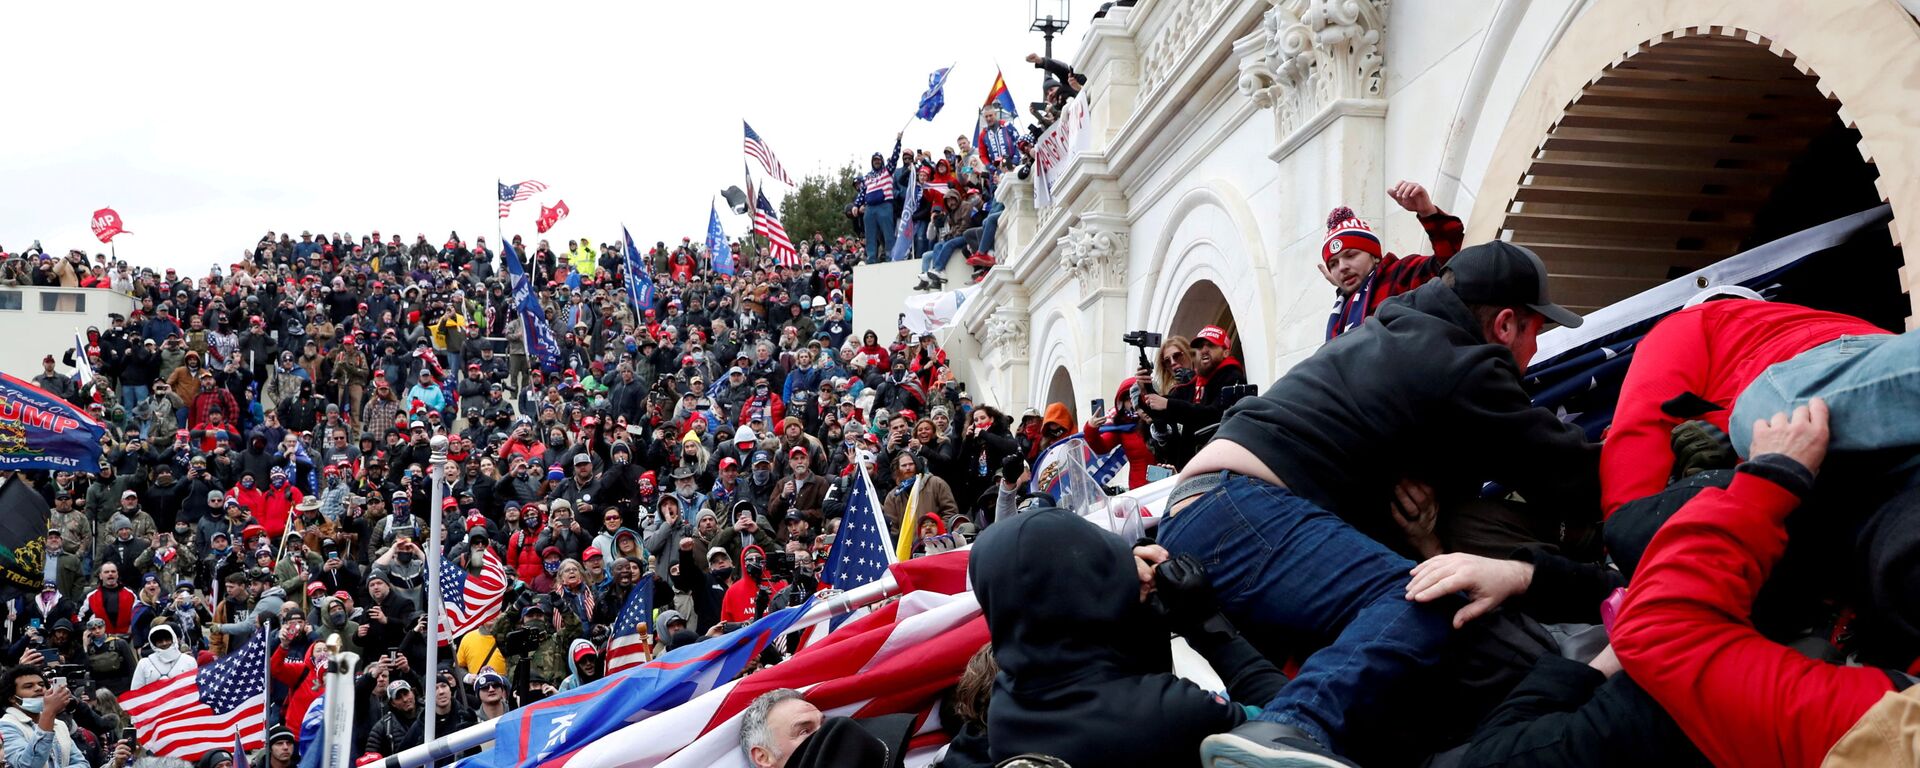  Pro-Trump protesters storm into the U.S. Capitol during clashes with police, during a rally to contest the certification of the 2020 U.S. presidential election results by the U.S. Congress, in Washington, U.S, January 6, 2021 - Sputnik International, 1920, 04.06.2021